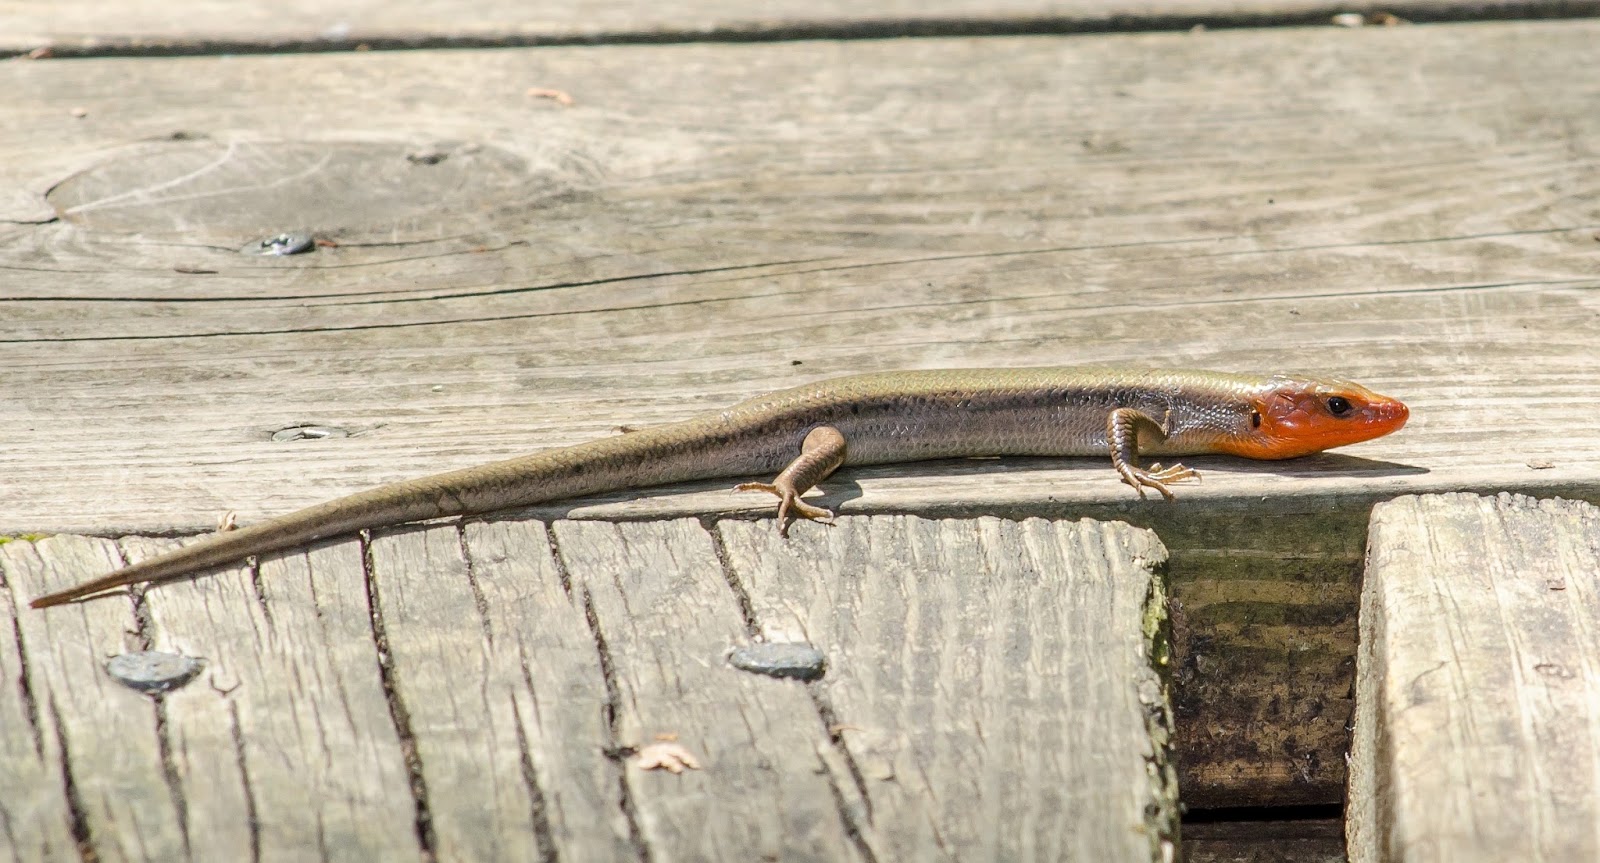 Male Five-Lined Skink